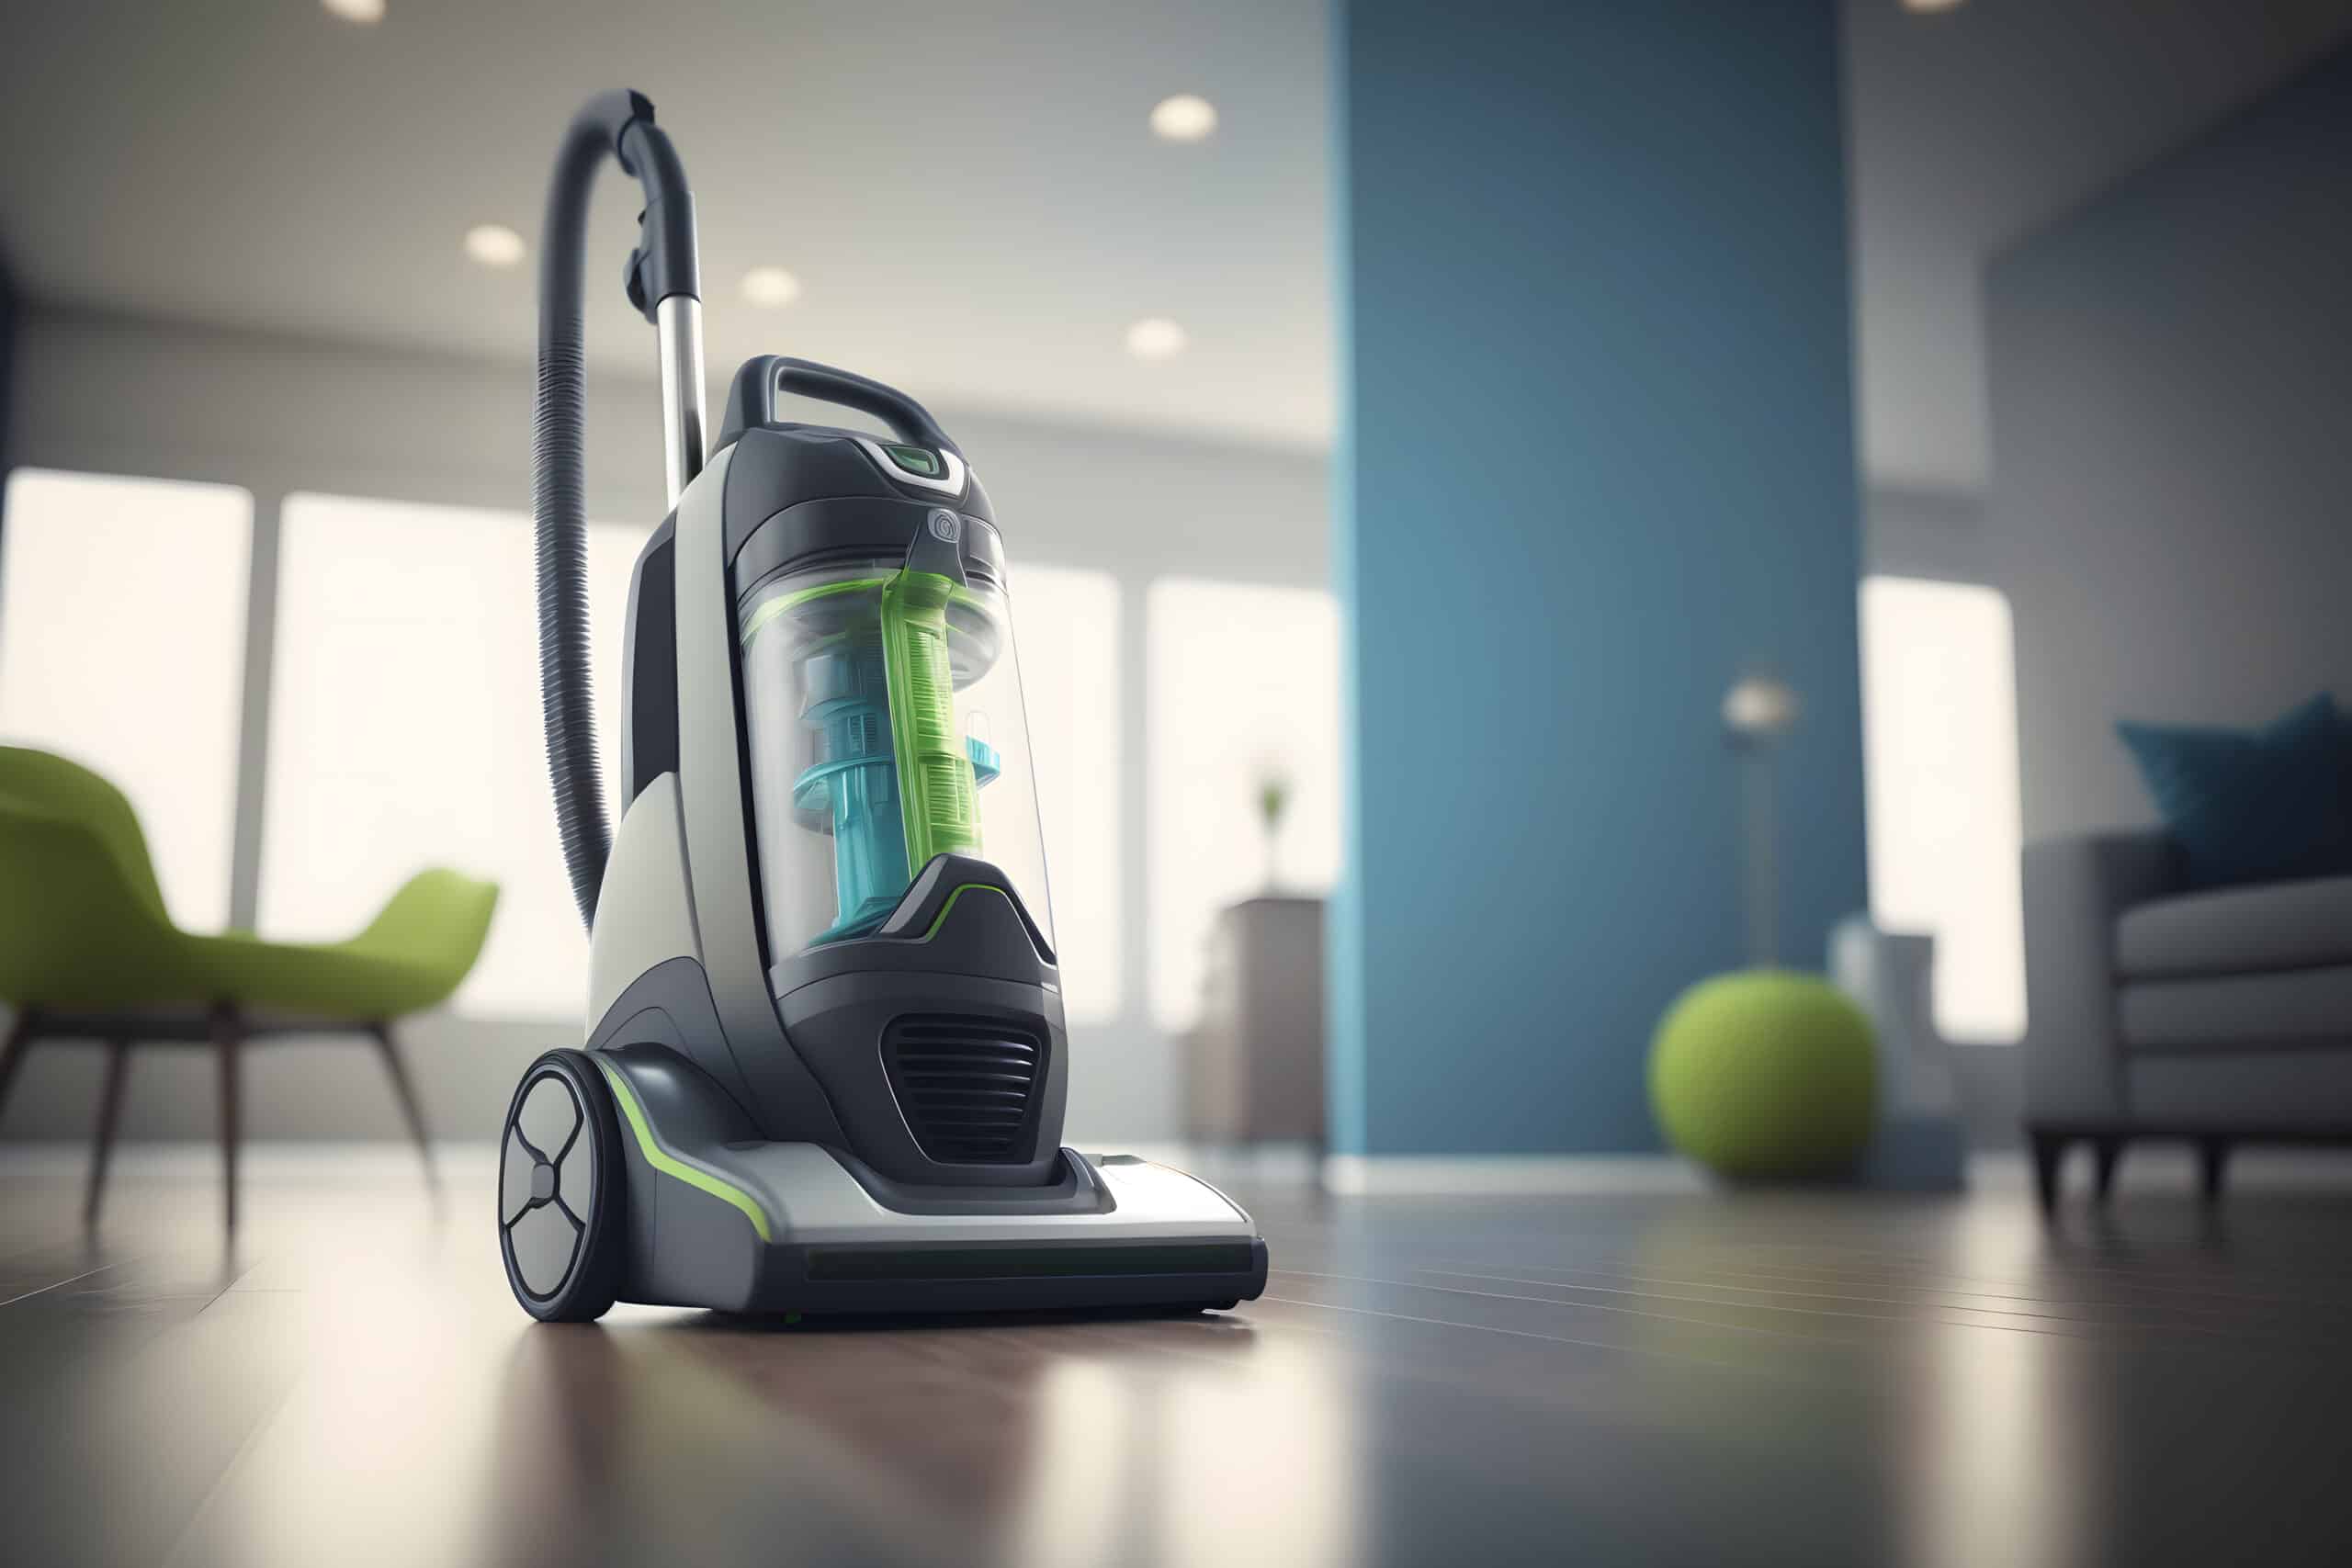 www.appr.com : How To Clean A Hoover Vacuum Cleaner?